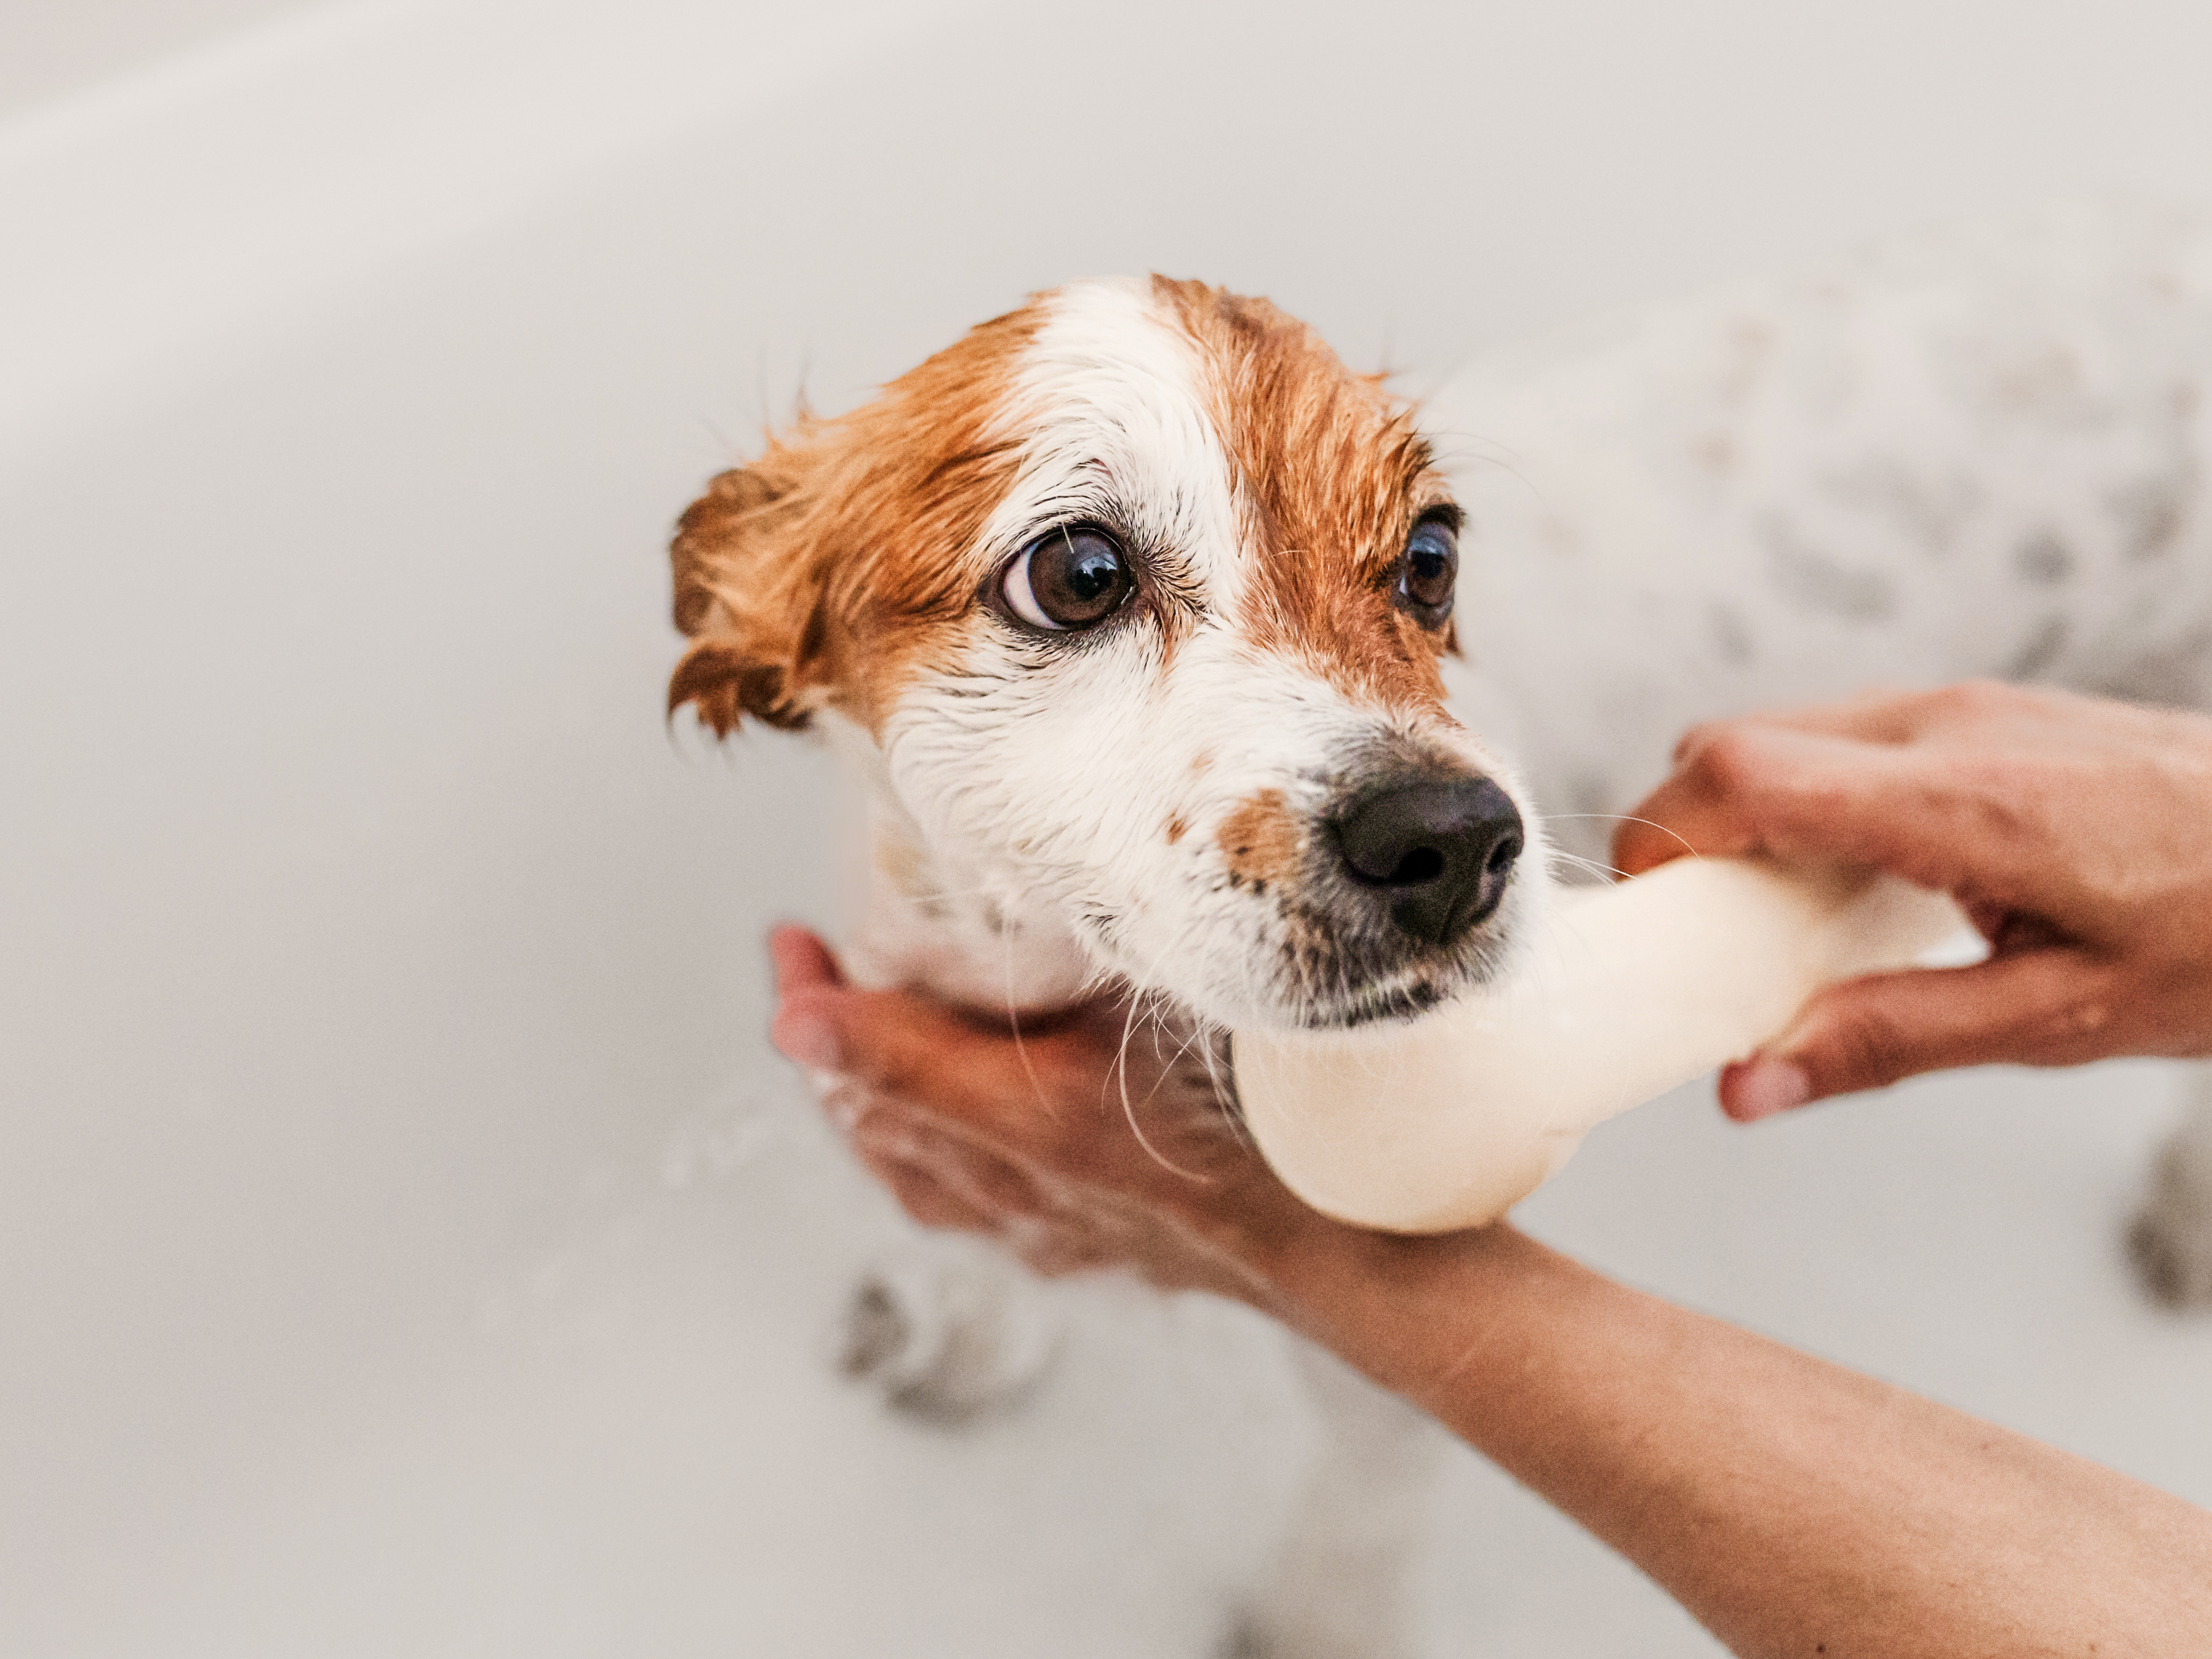 Jack Russell Terrier puppy being rinsed in a bath